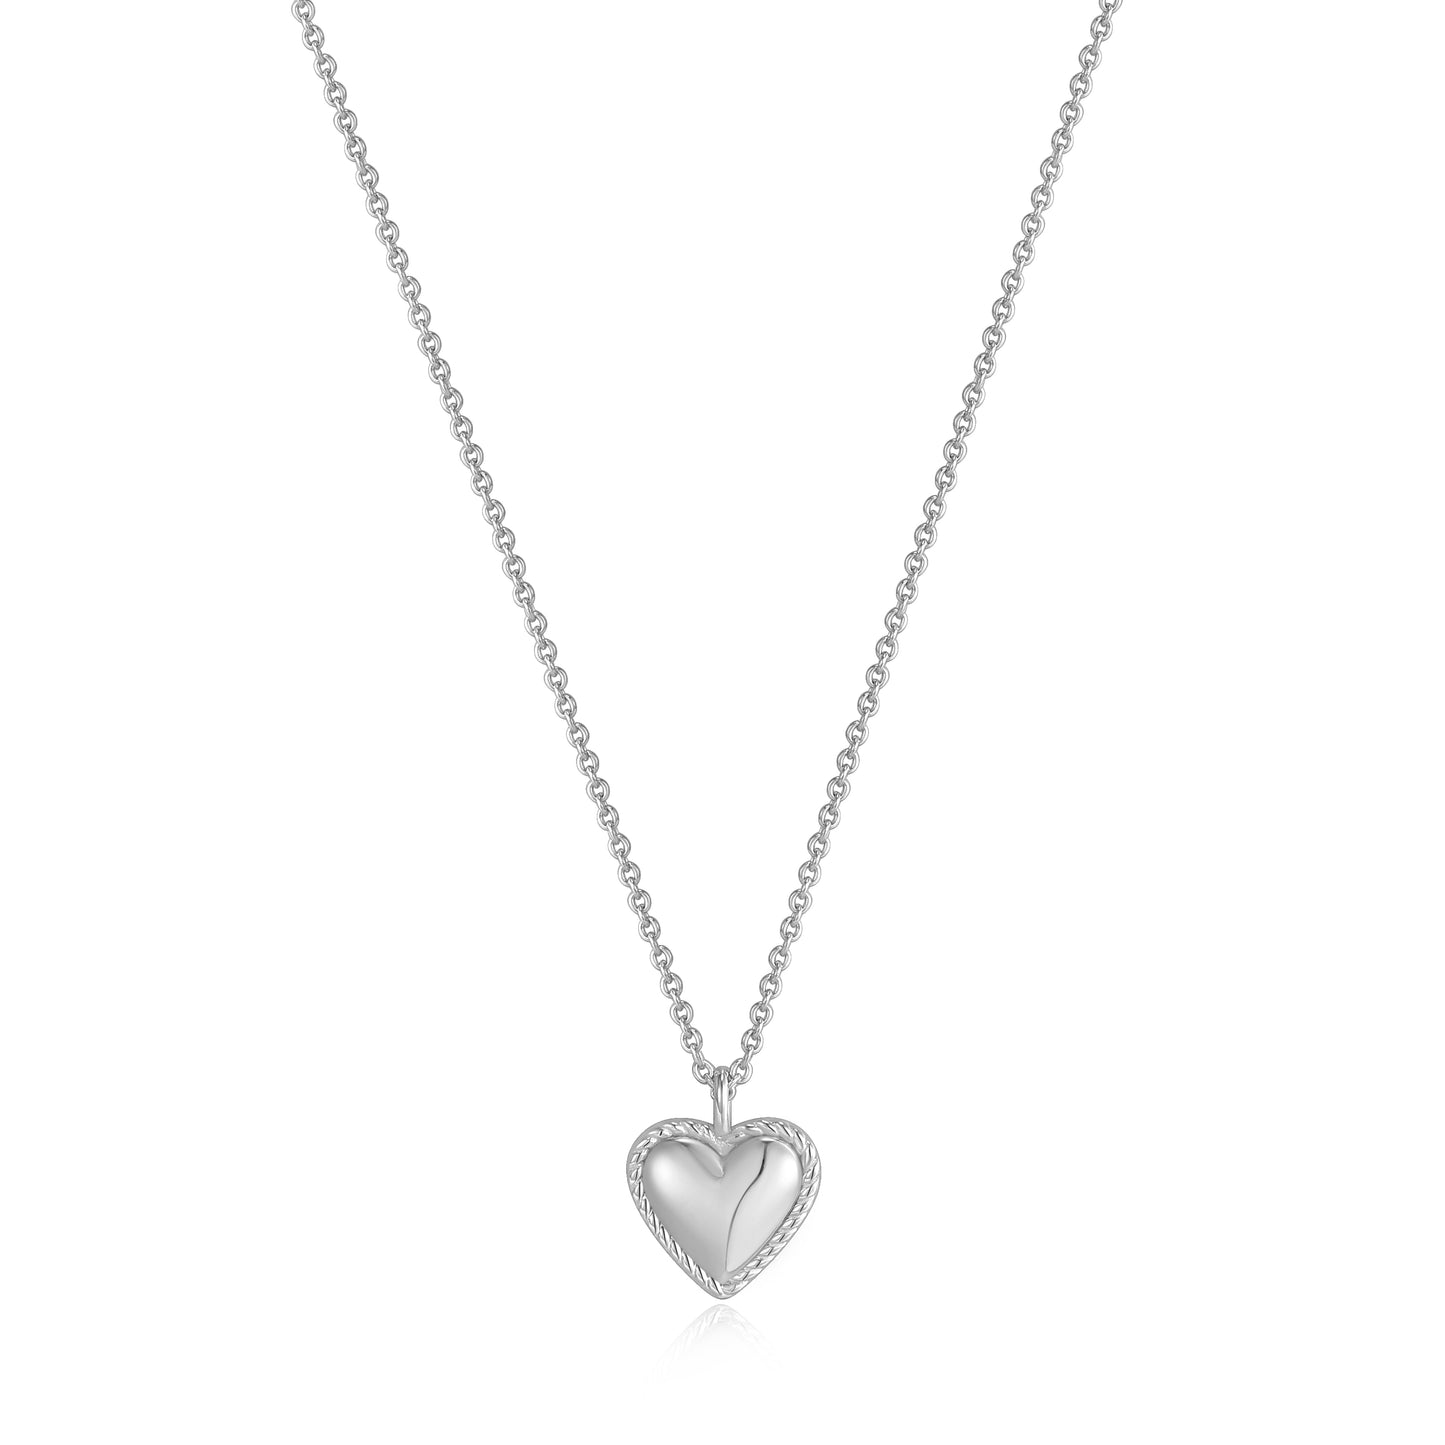 Ania Haie Rope Heart Pendant Necklace - Silver Necklace